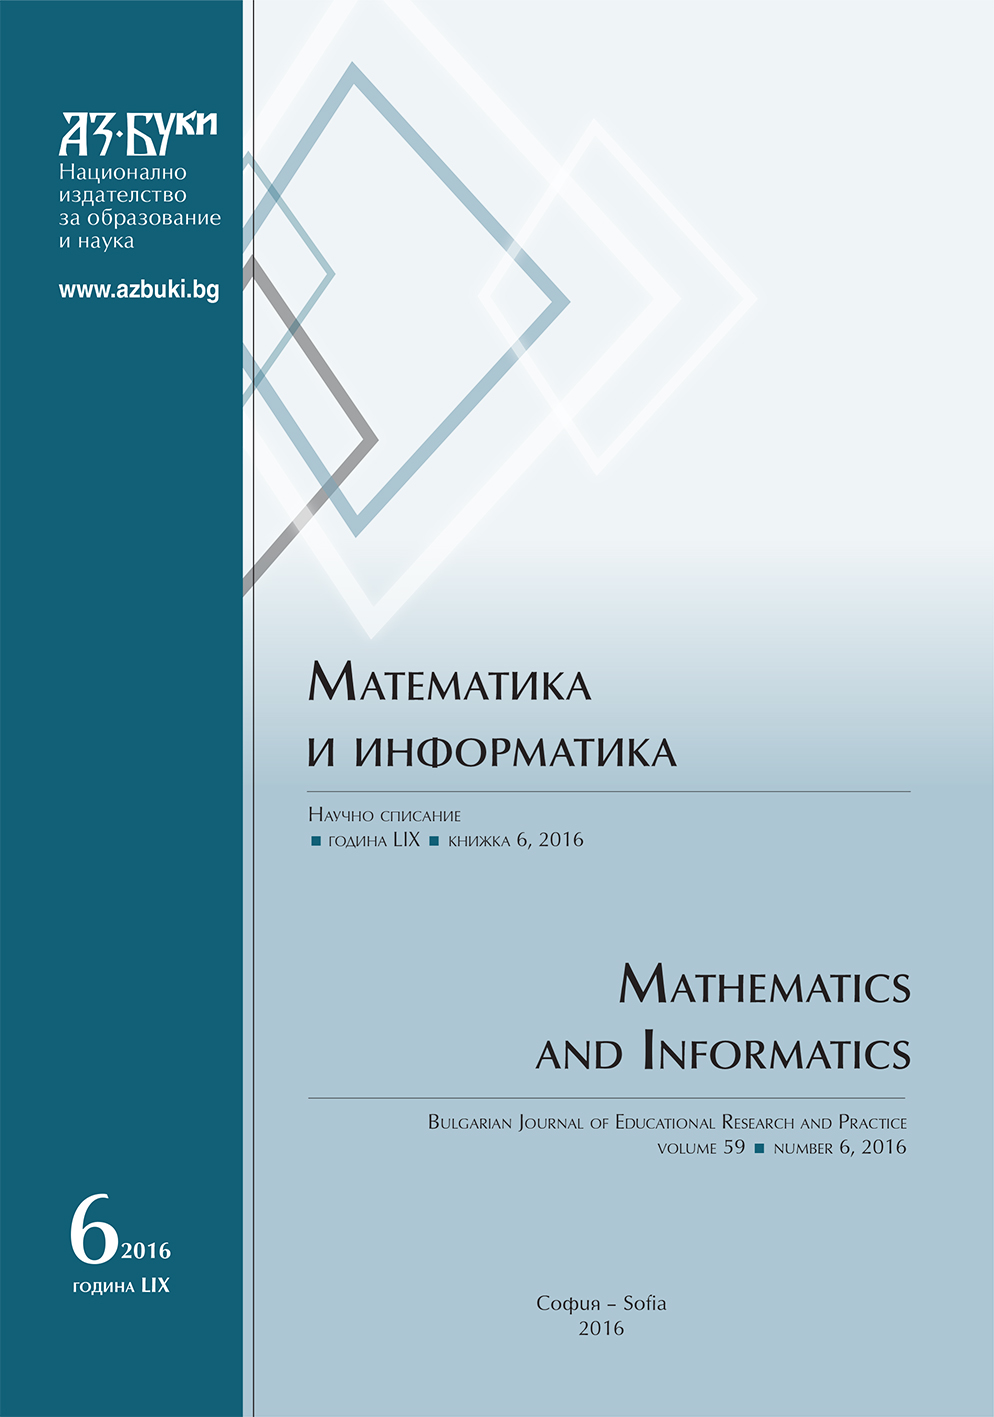 Some New Inequalities аmong the Arithmetic, Geometric, Harmonic and Quadratic Means Cover Image